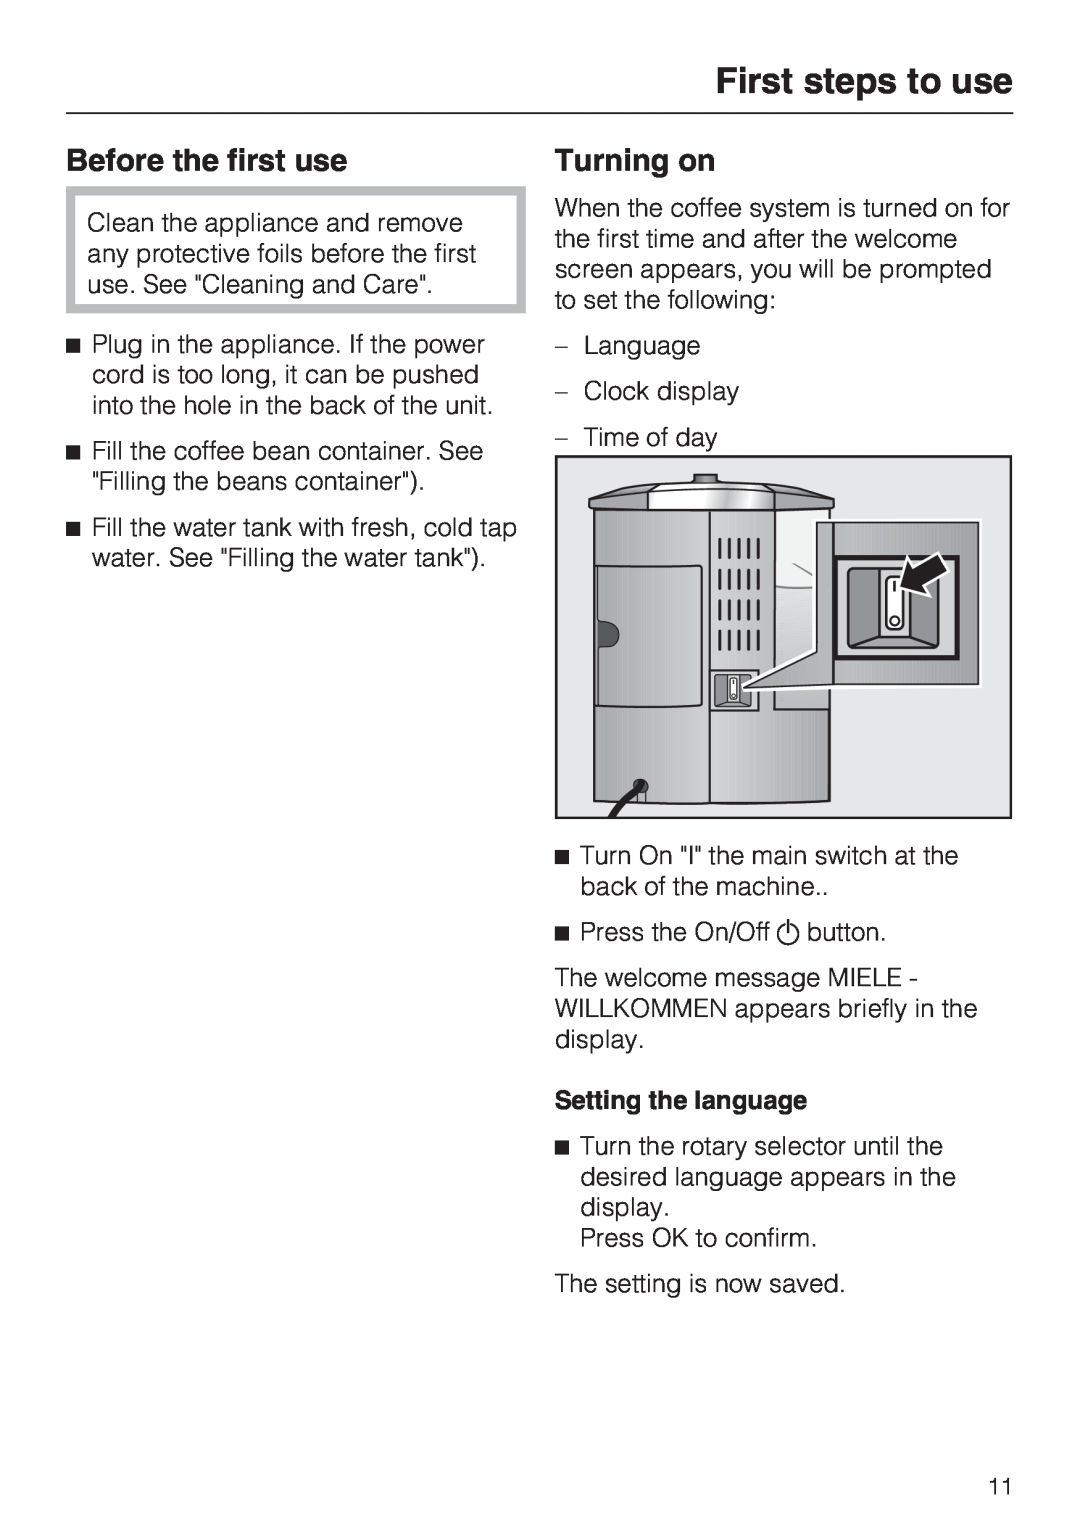 Miele CM 5000 operating instructions First steps to use, Before the first use, Turning on 